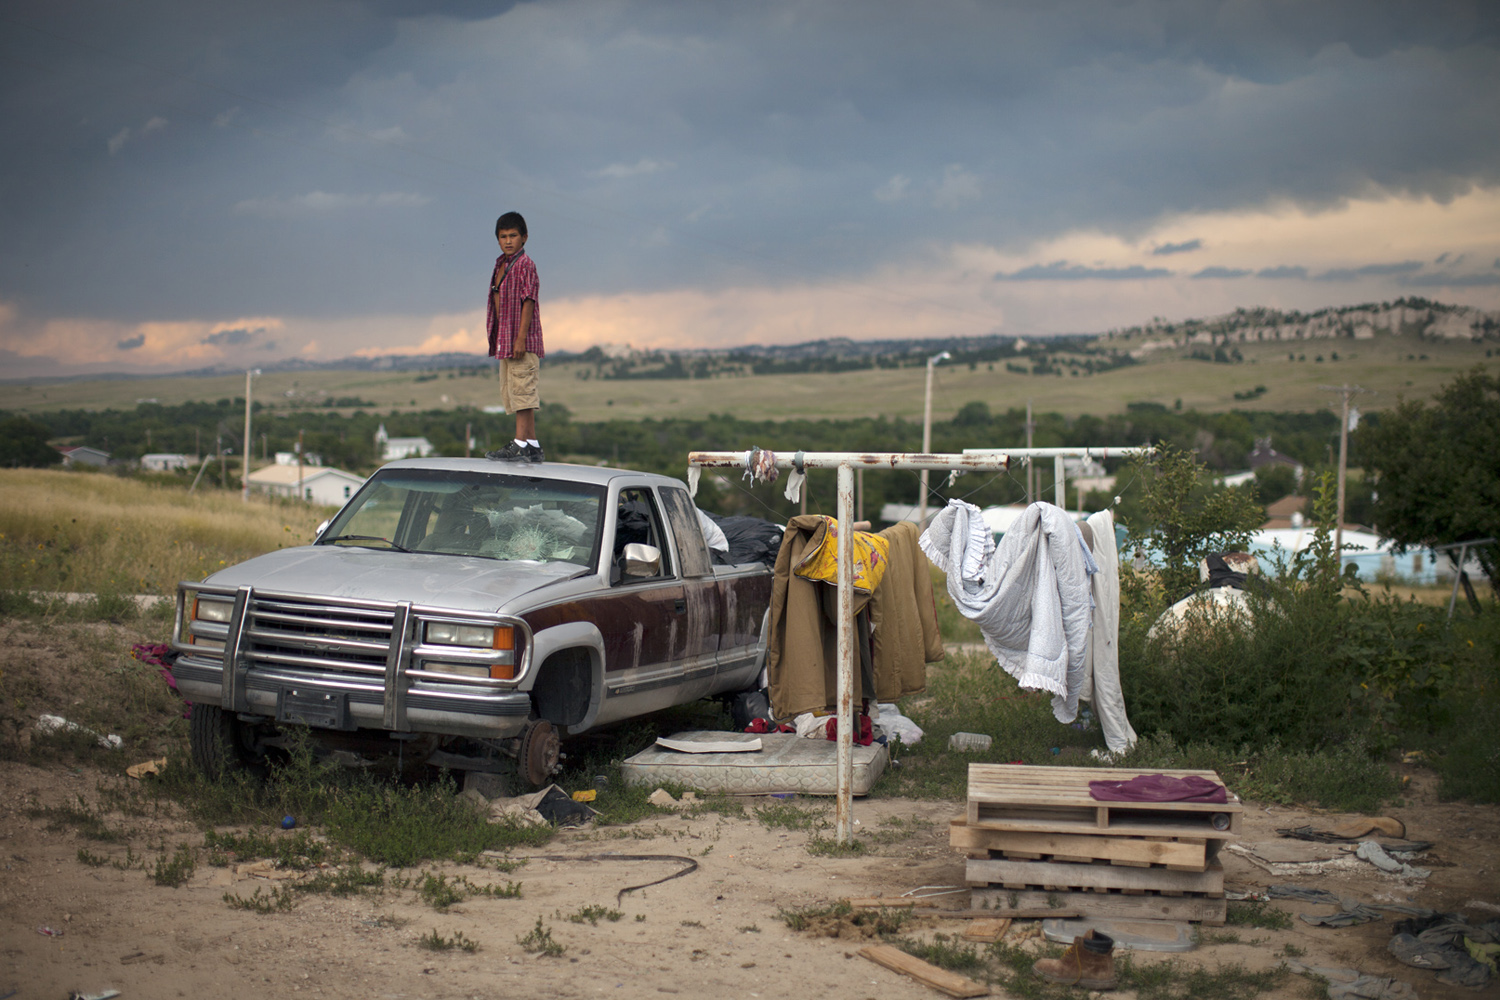 A young boy and truck, Manderson, SD.